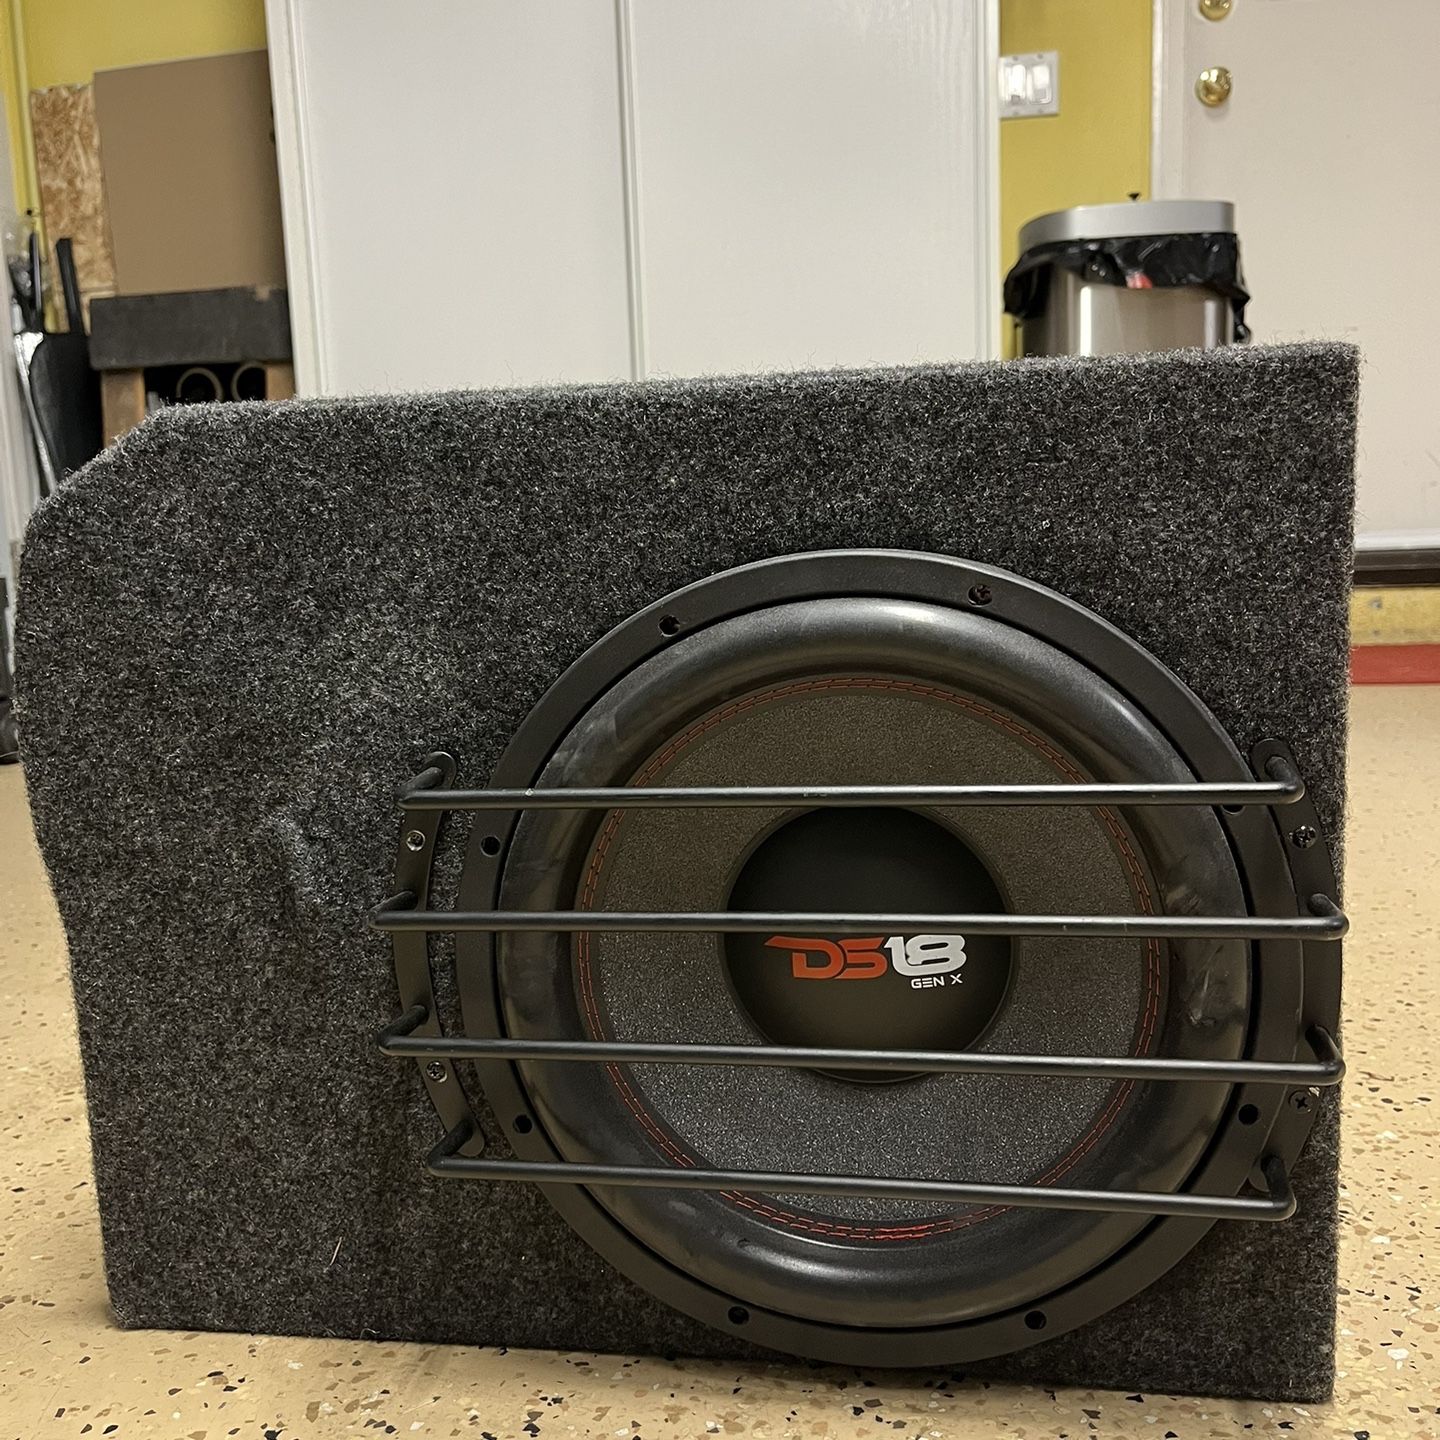 12” Subwoofer DS-18 With Custom Enclosure Box 